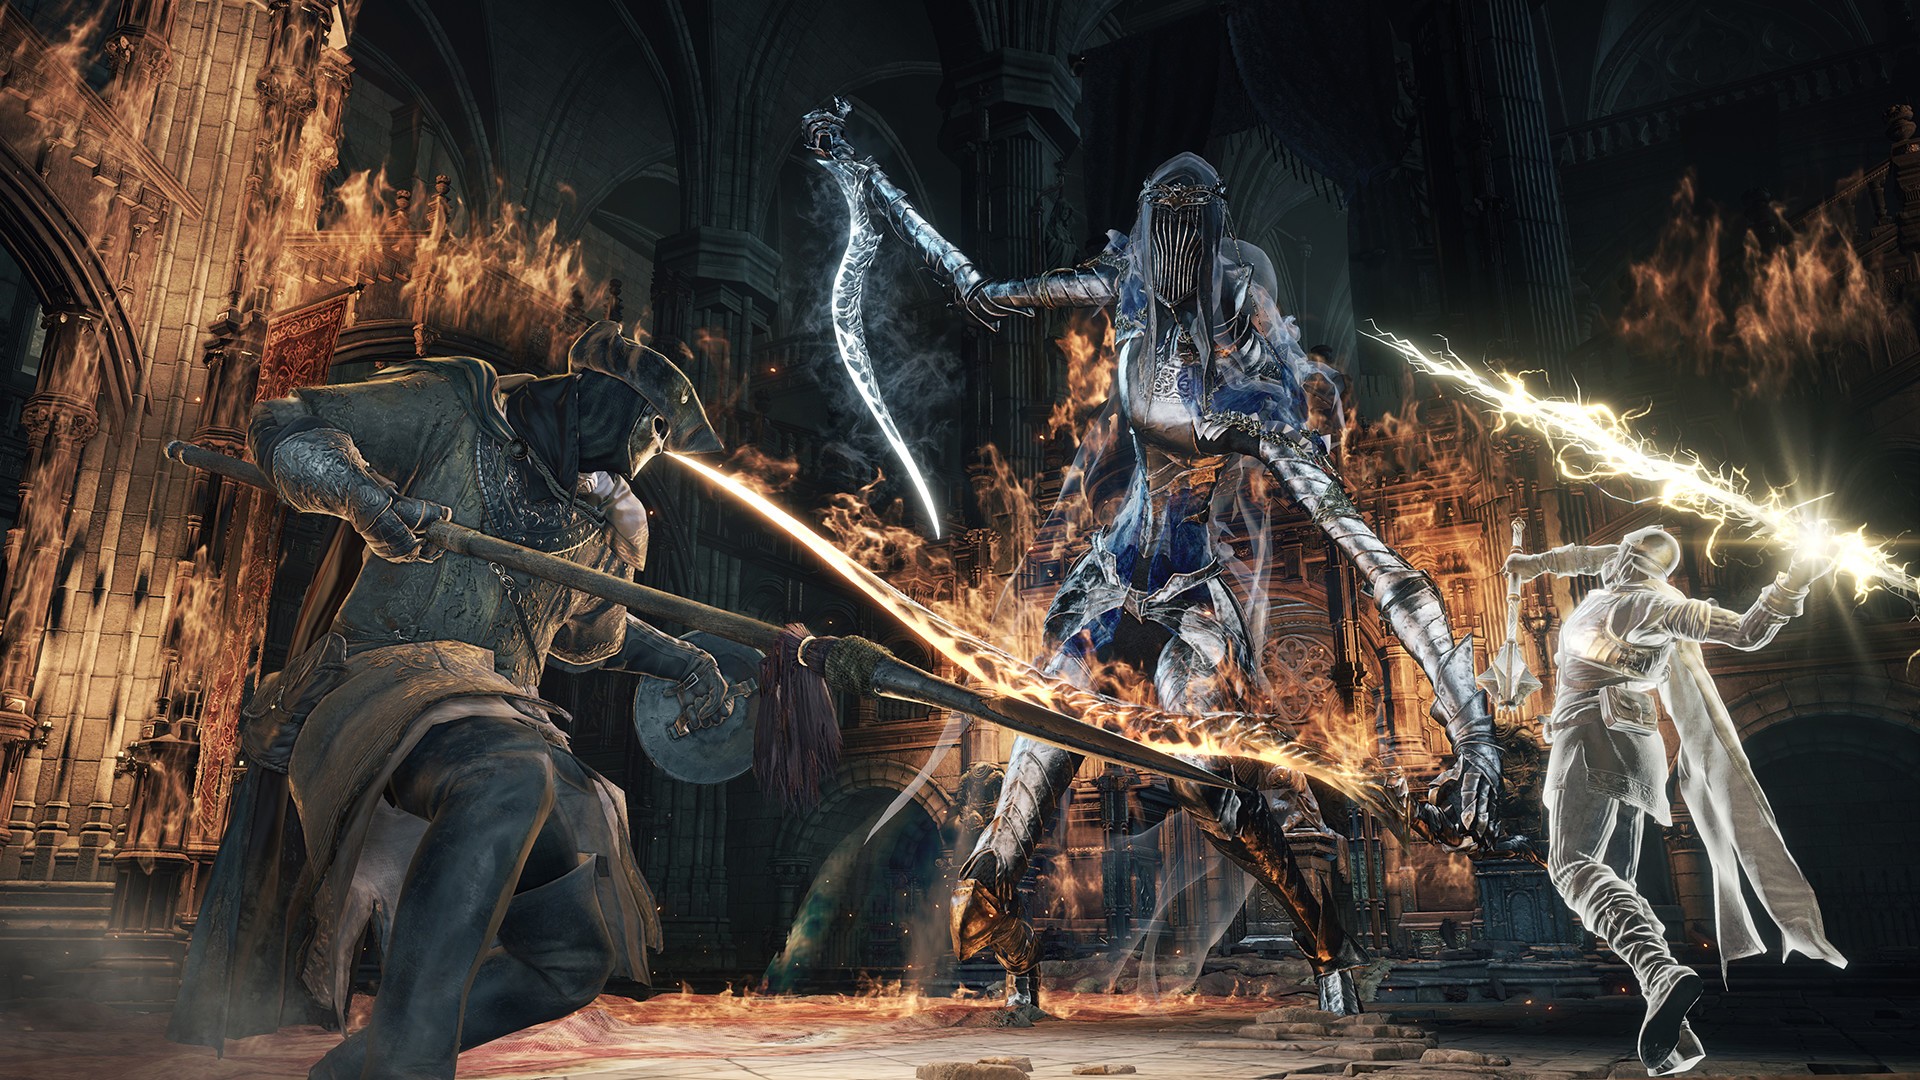 Dark Souls 3 a game by From Software that is notorious for its difficulty. 